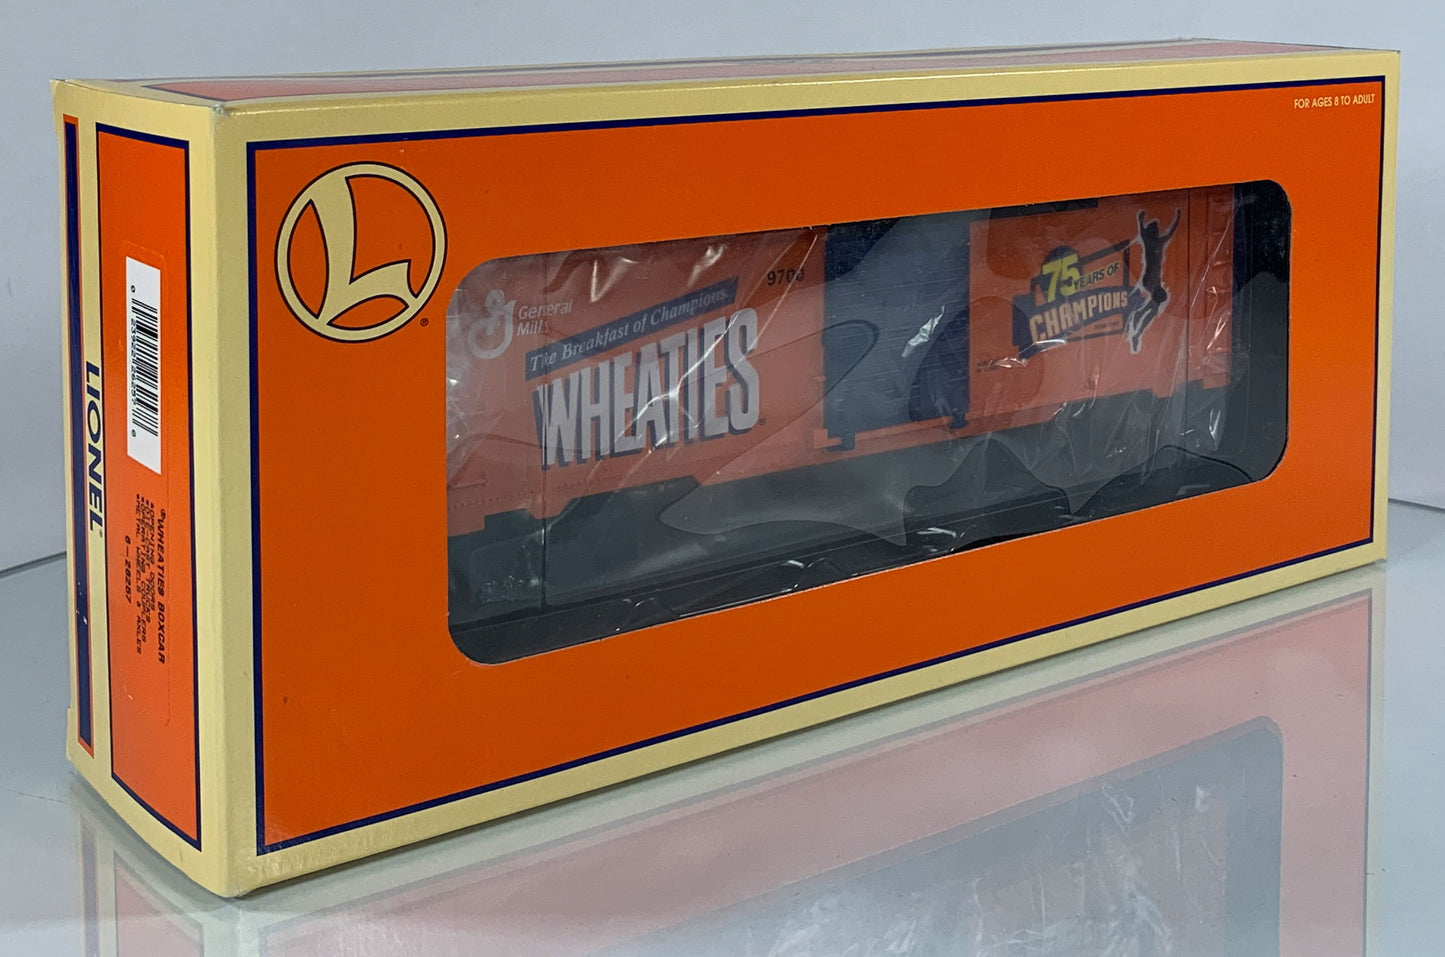 LIONEL • O GAUGE • 1999 Wheaties Boxcar 6-26257 • NEW OLD STOCK